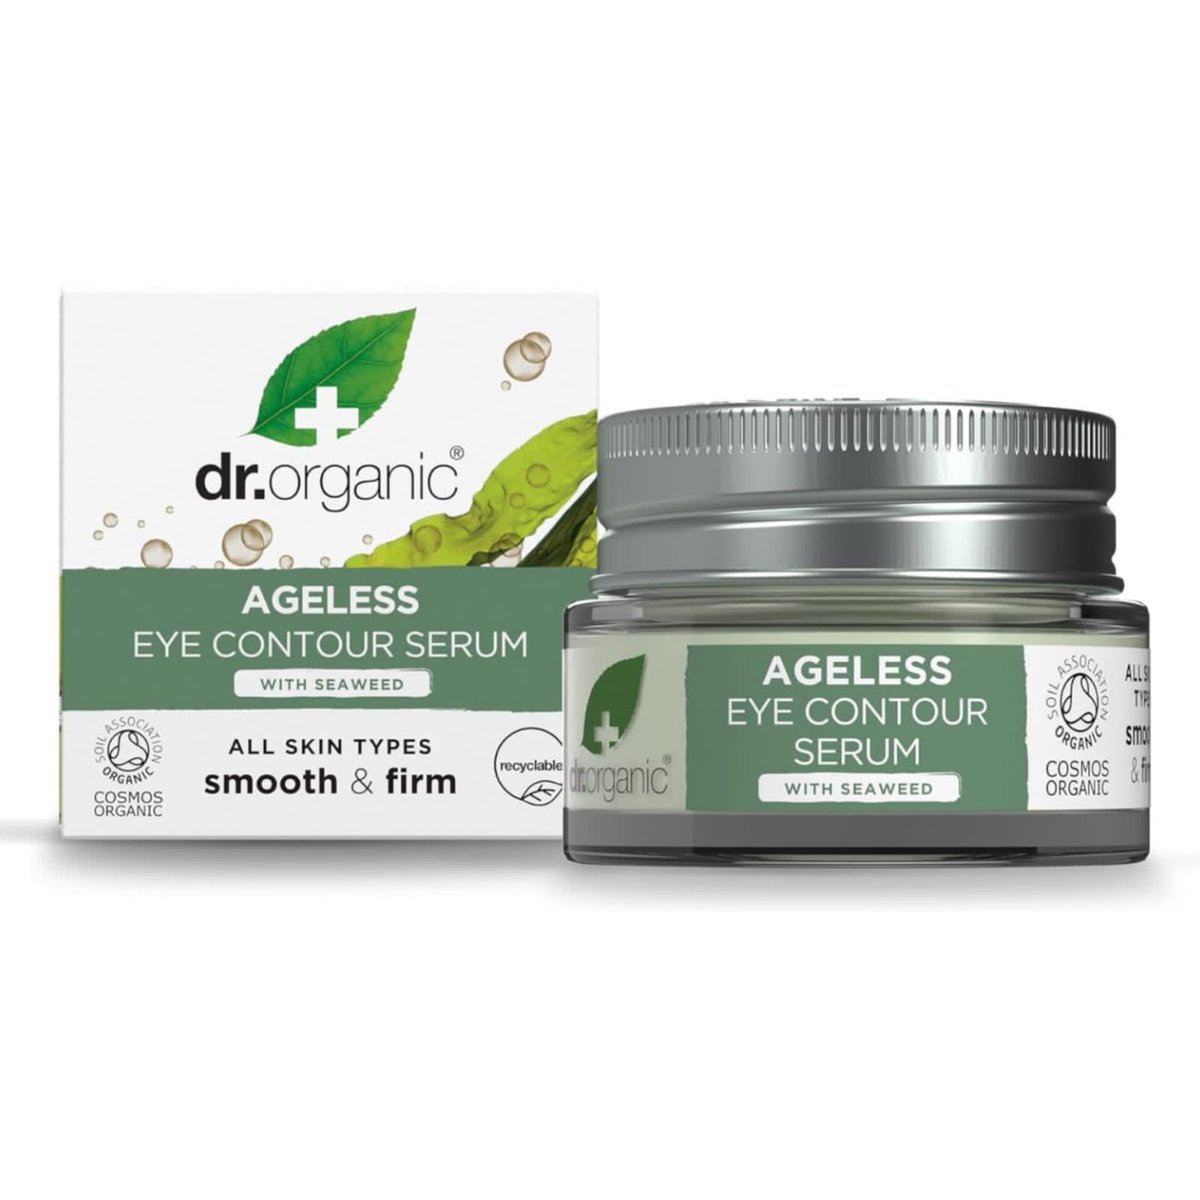 Fine lines and wrinkles got you down? Dr. Ageless to the rescue. Their natural seaweed products help reduce the signs of aging for a more youthful appearance #AgelessByDrOrganic Doctor Organic @YouByArmaan